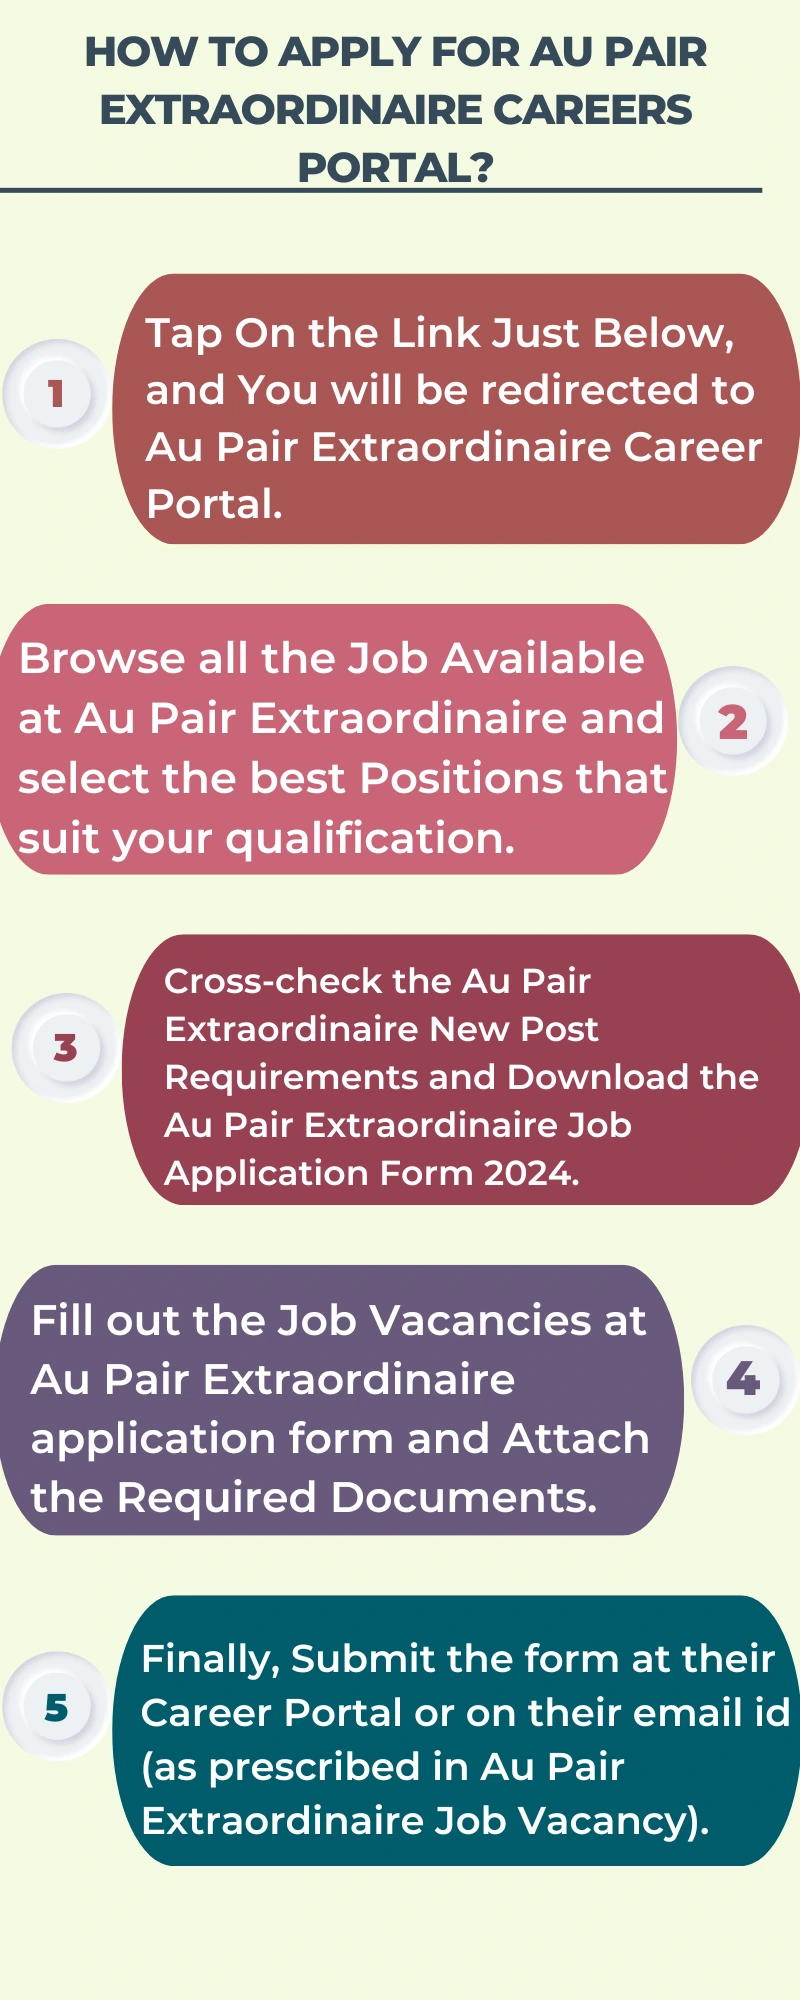 How To Apply for Au Pair Extraordinaire Careers Portal?